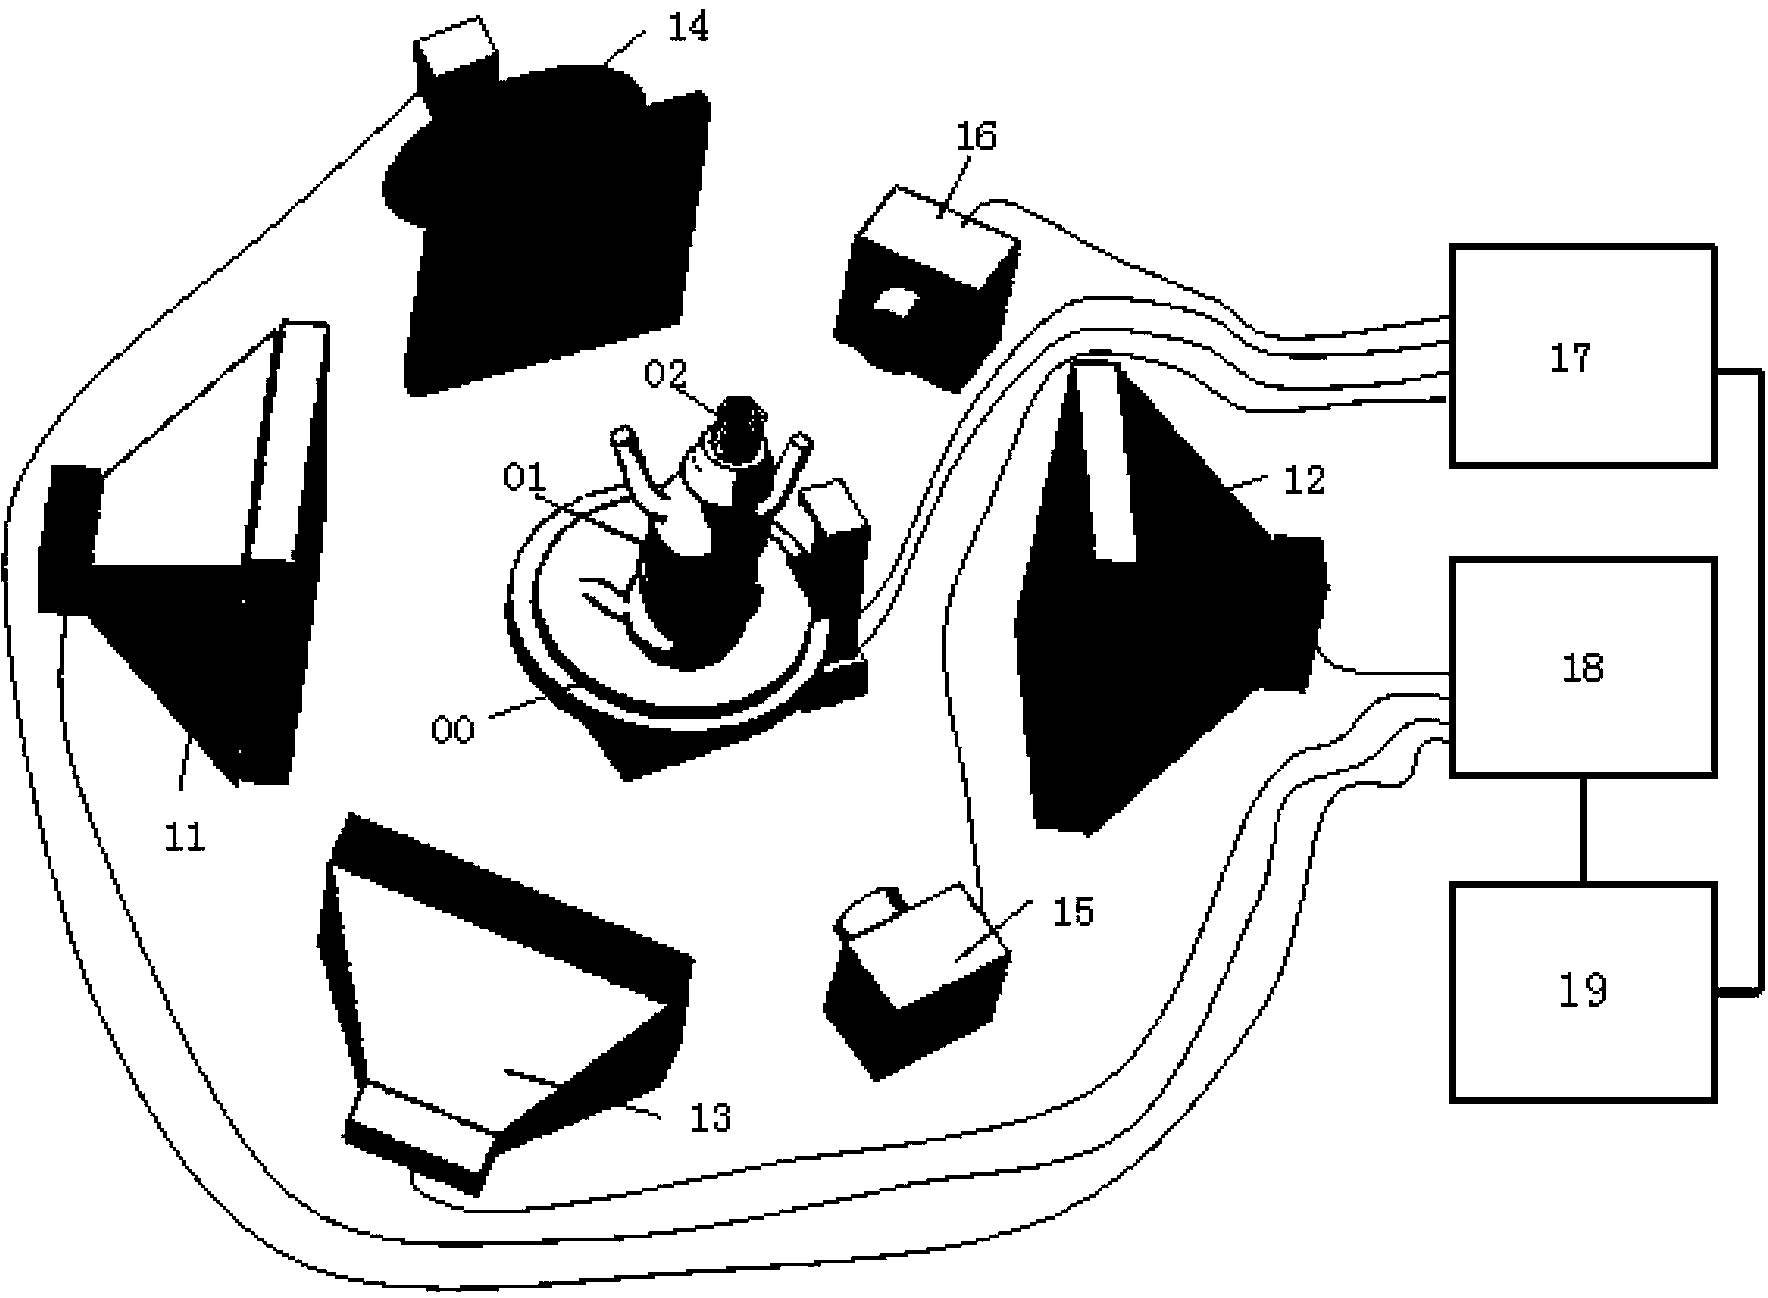 In-vivo multi-mode imaging detecting system with resolution being at least 50 mu m